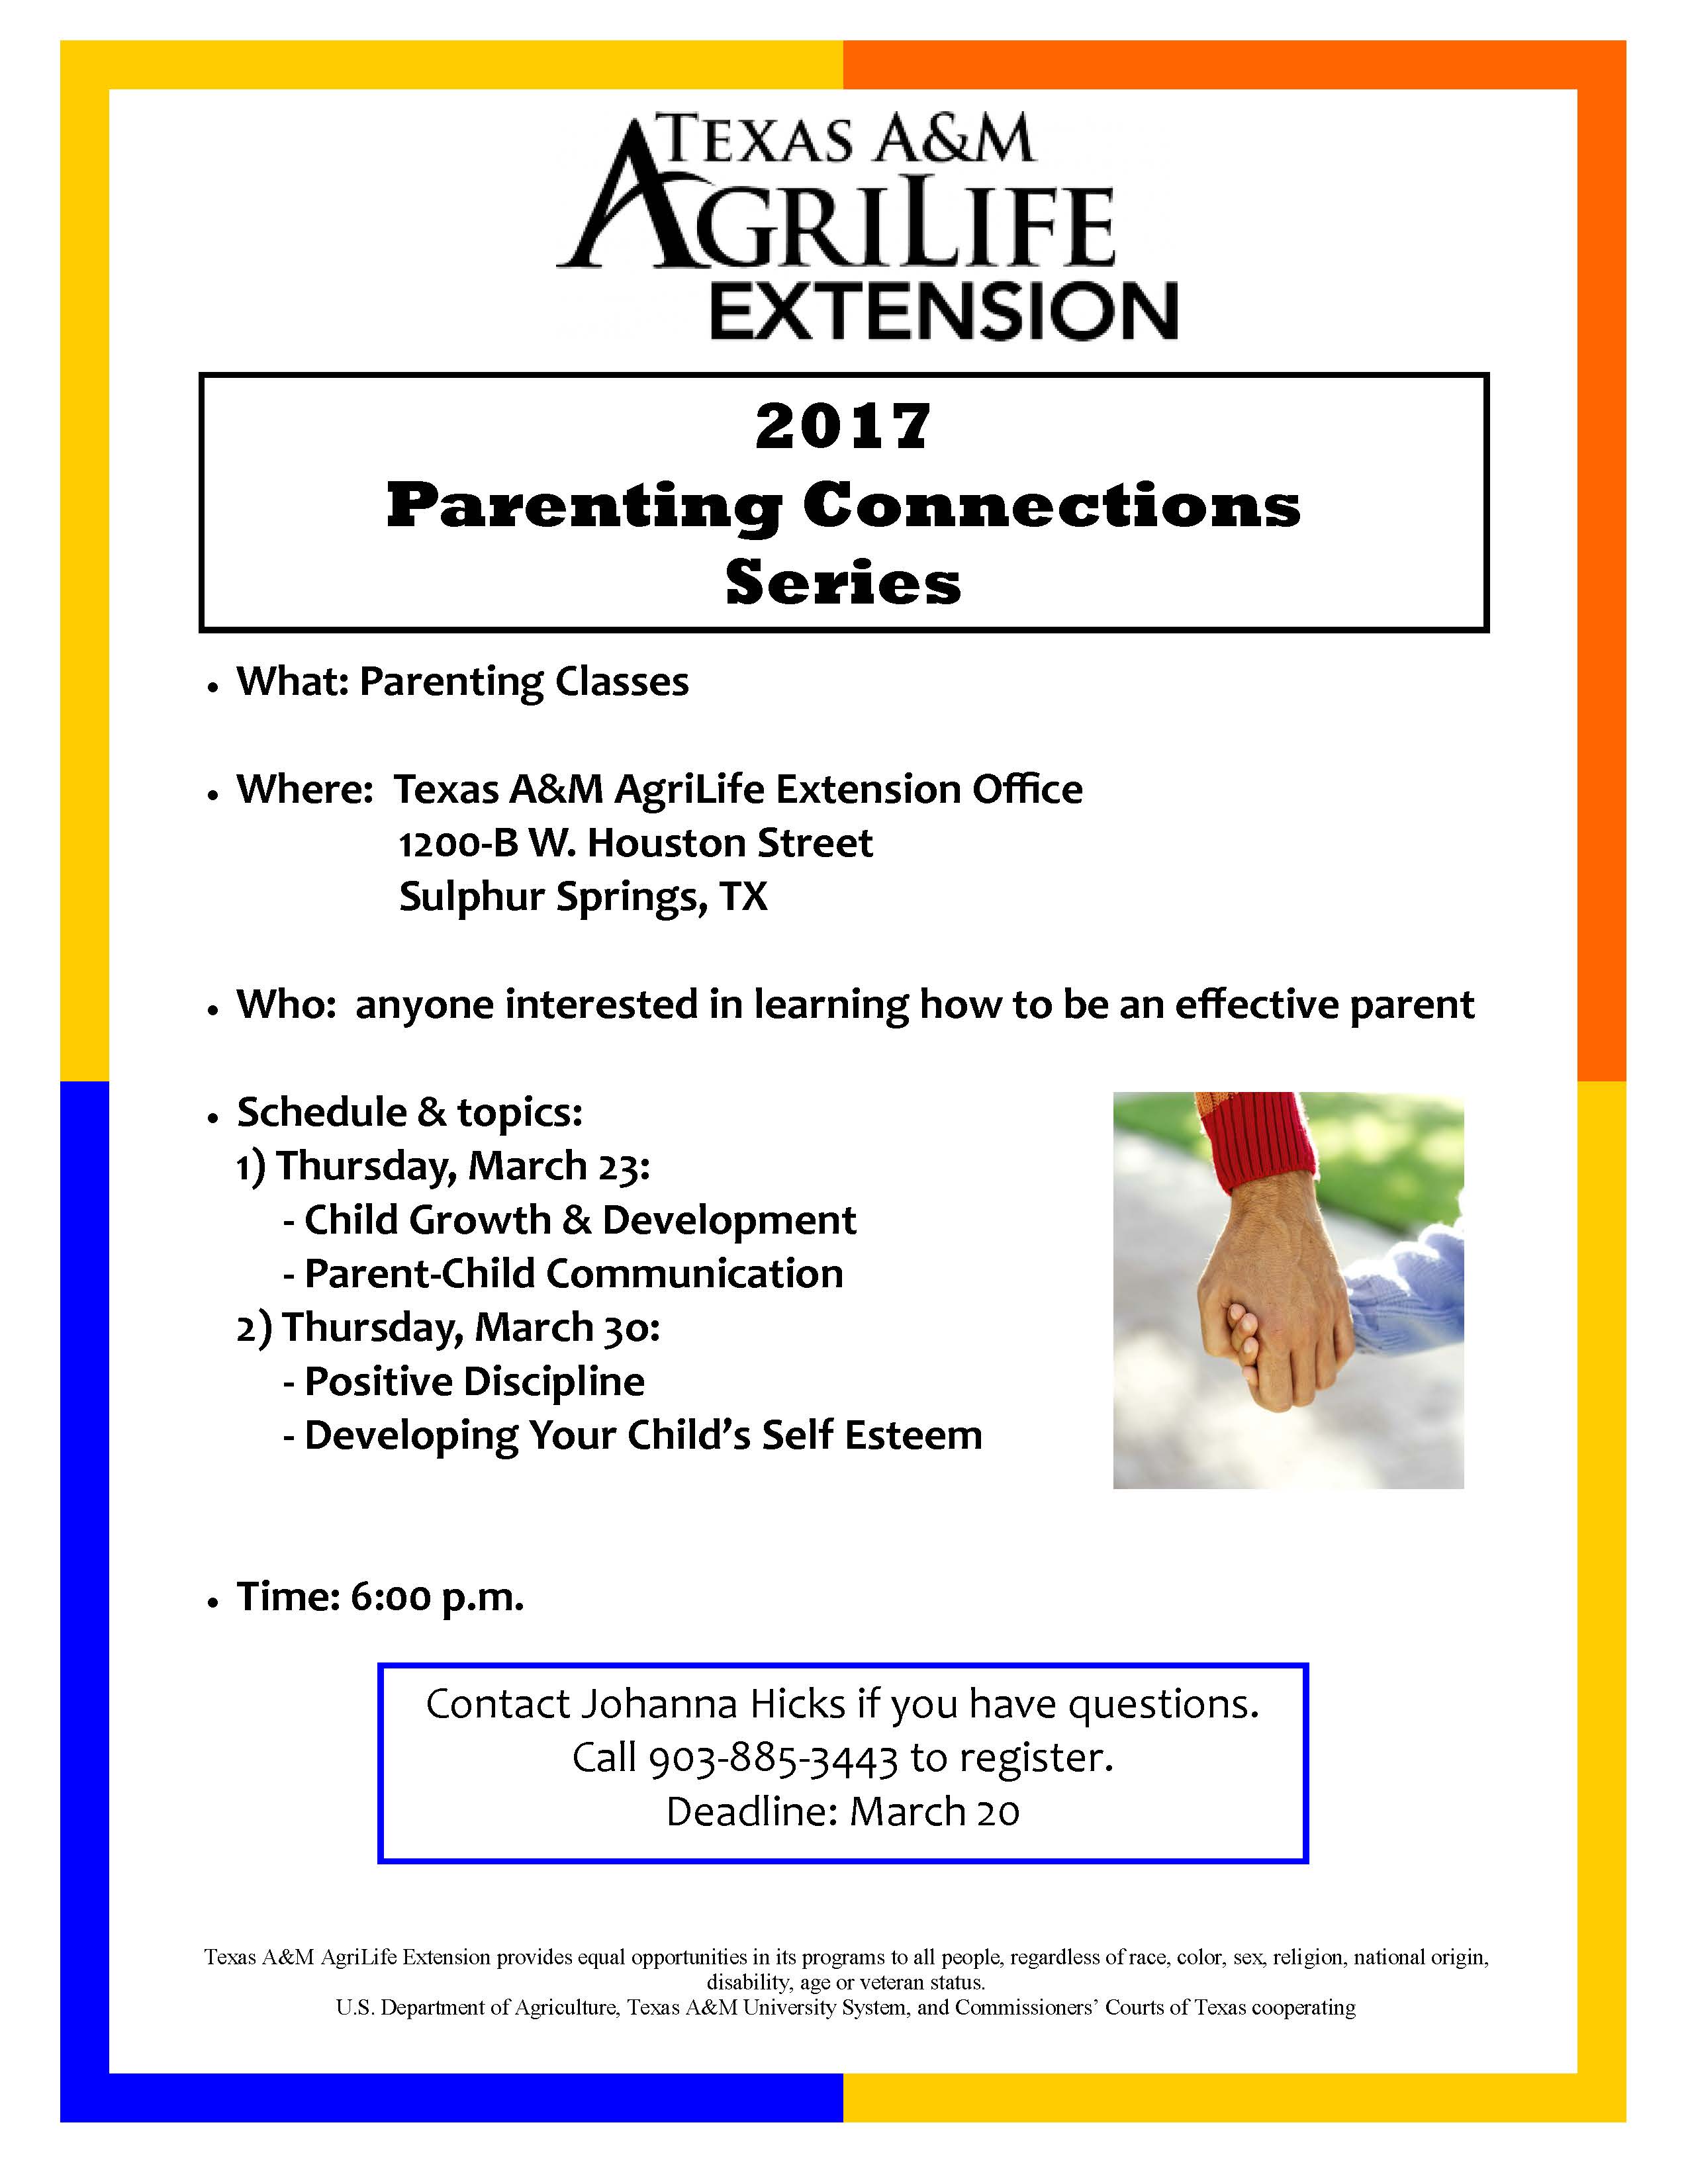 Texas A&M AgriLife Extension Office Offering Parenting Classes March 23rd and 30th